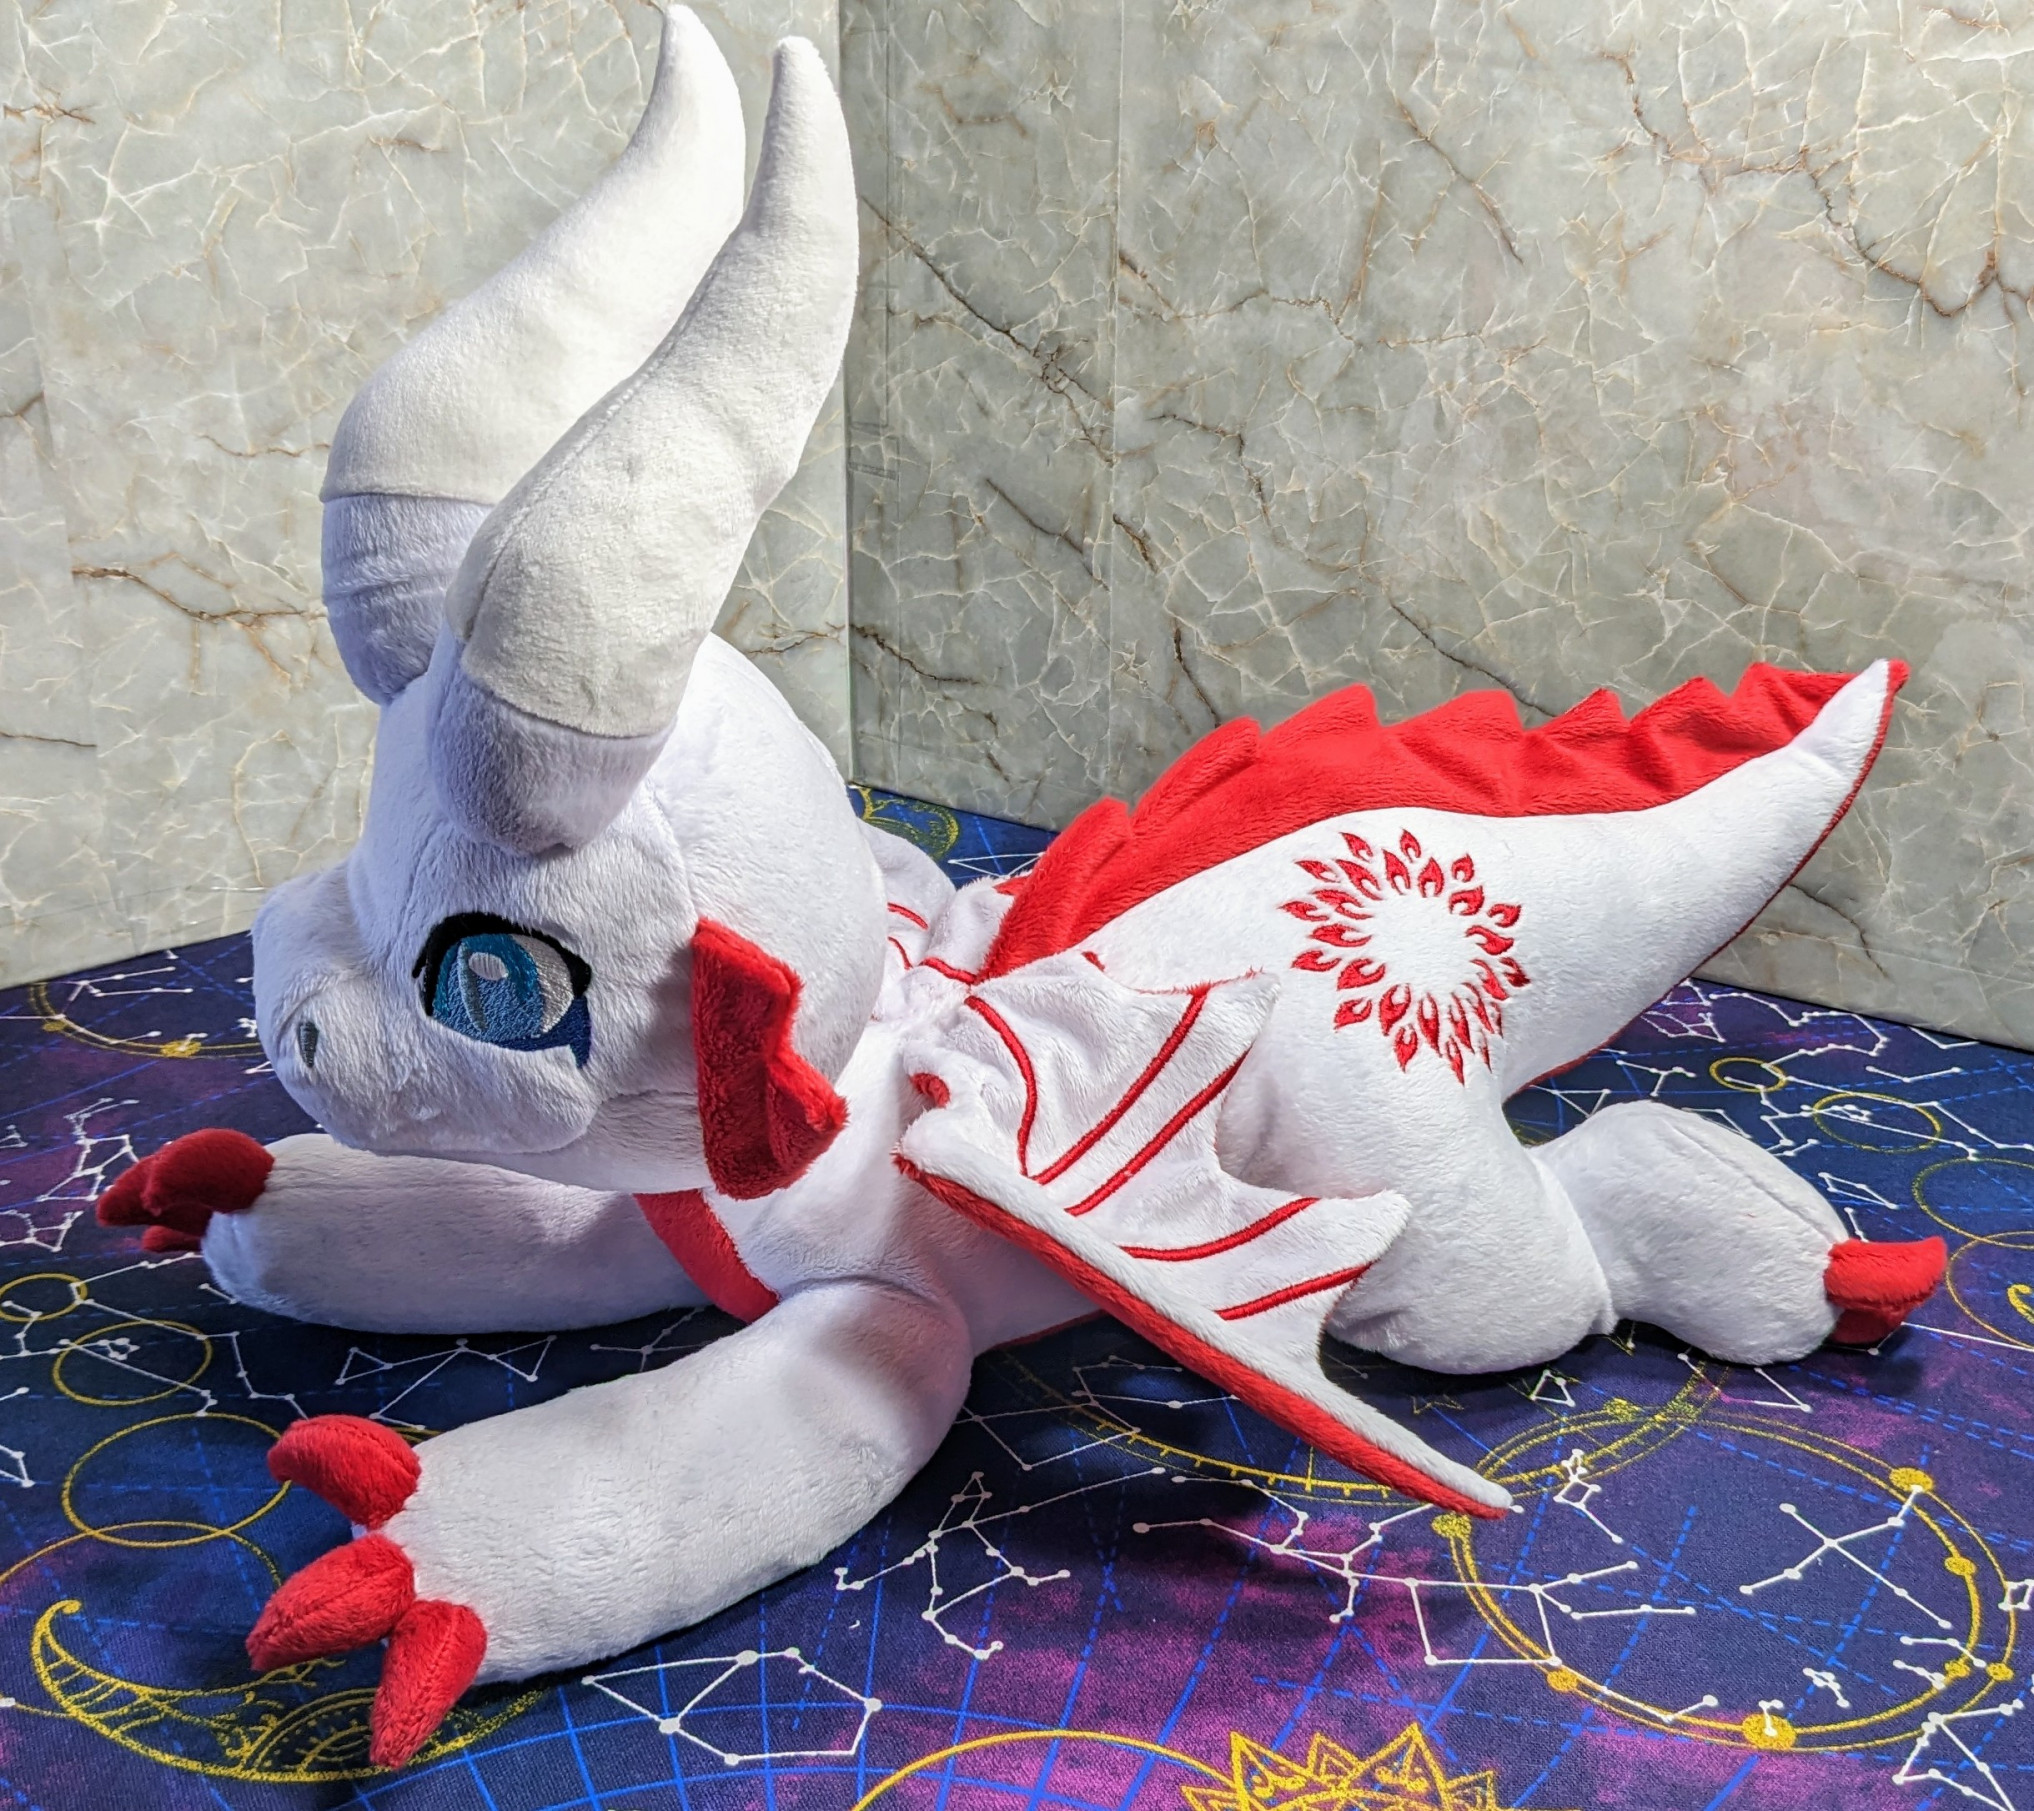 Pin on D3ath By Plushies